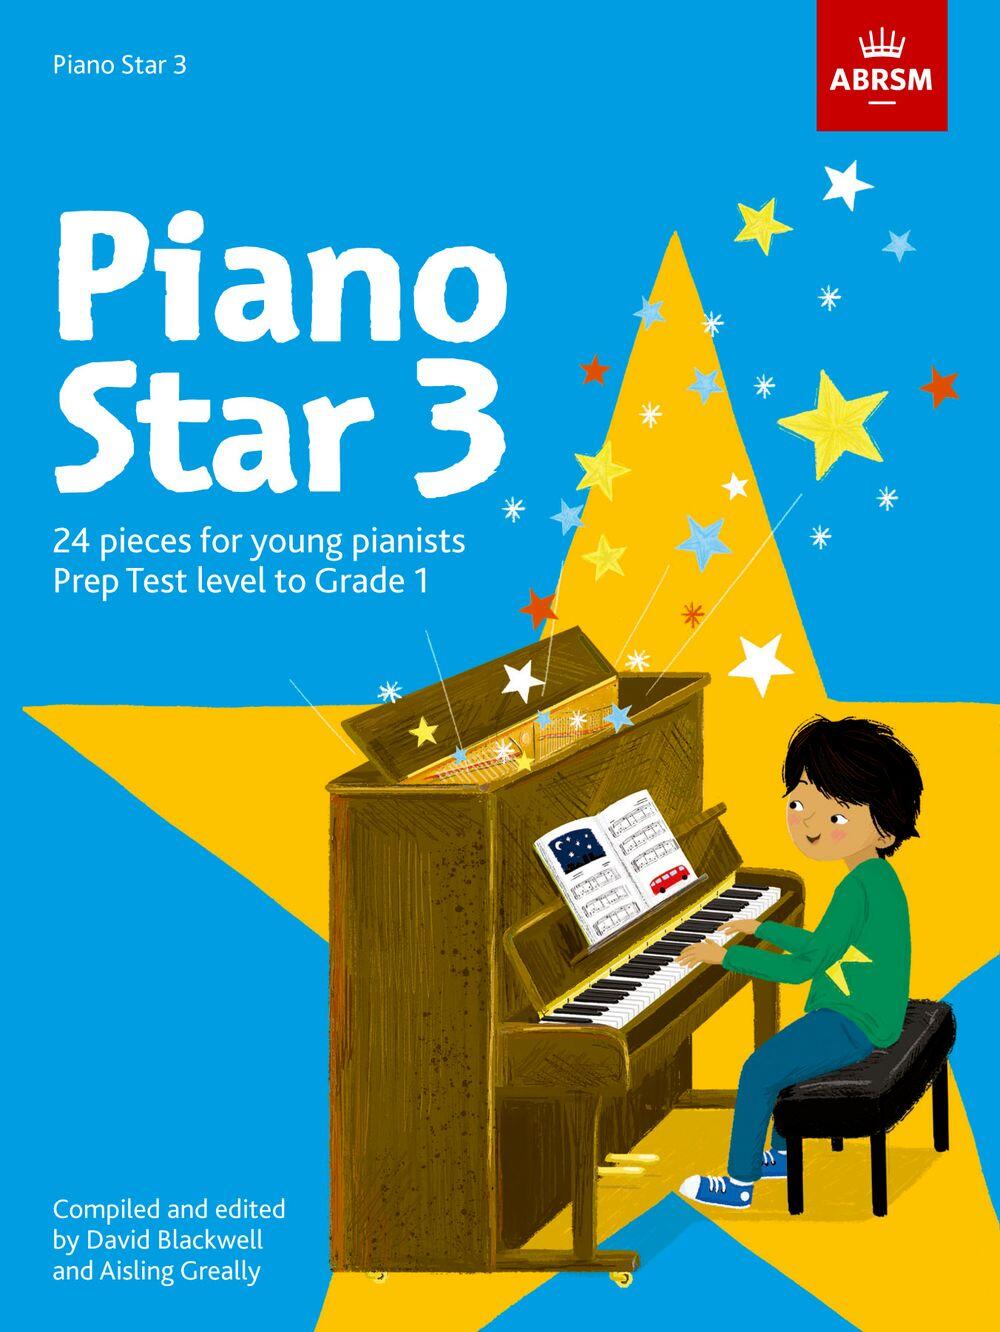 ABRSM Piano Star - Book 3 Klavier Piano Star / 24 pieces for young pianists Prep Test Level to Grade 1 : photo 1